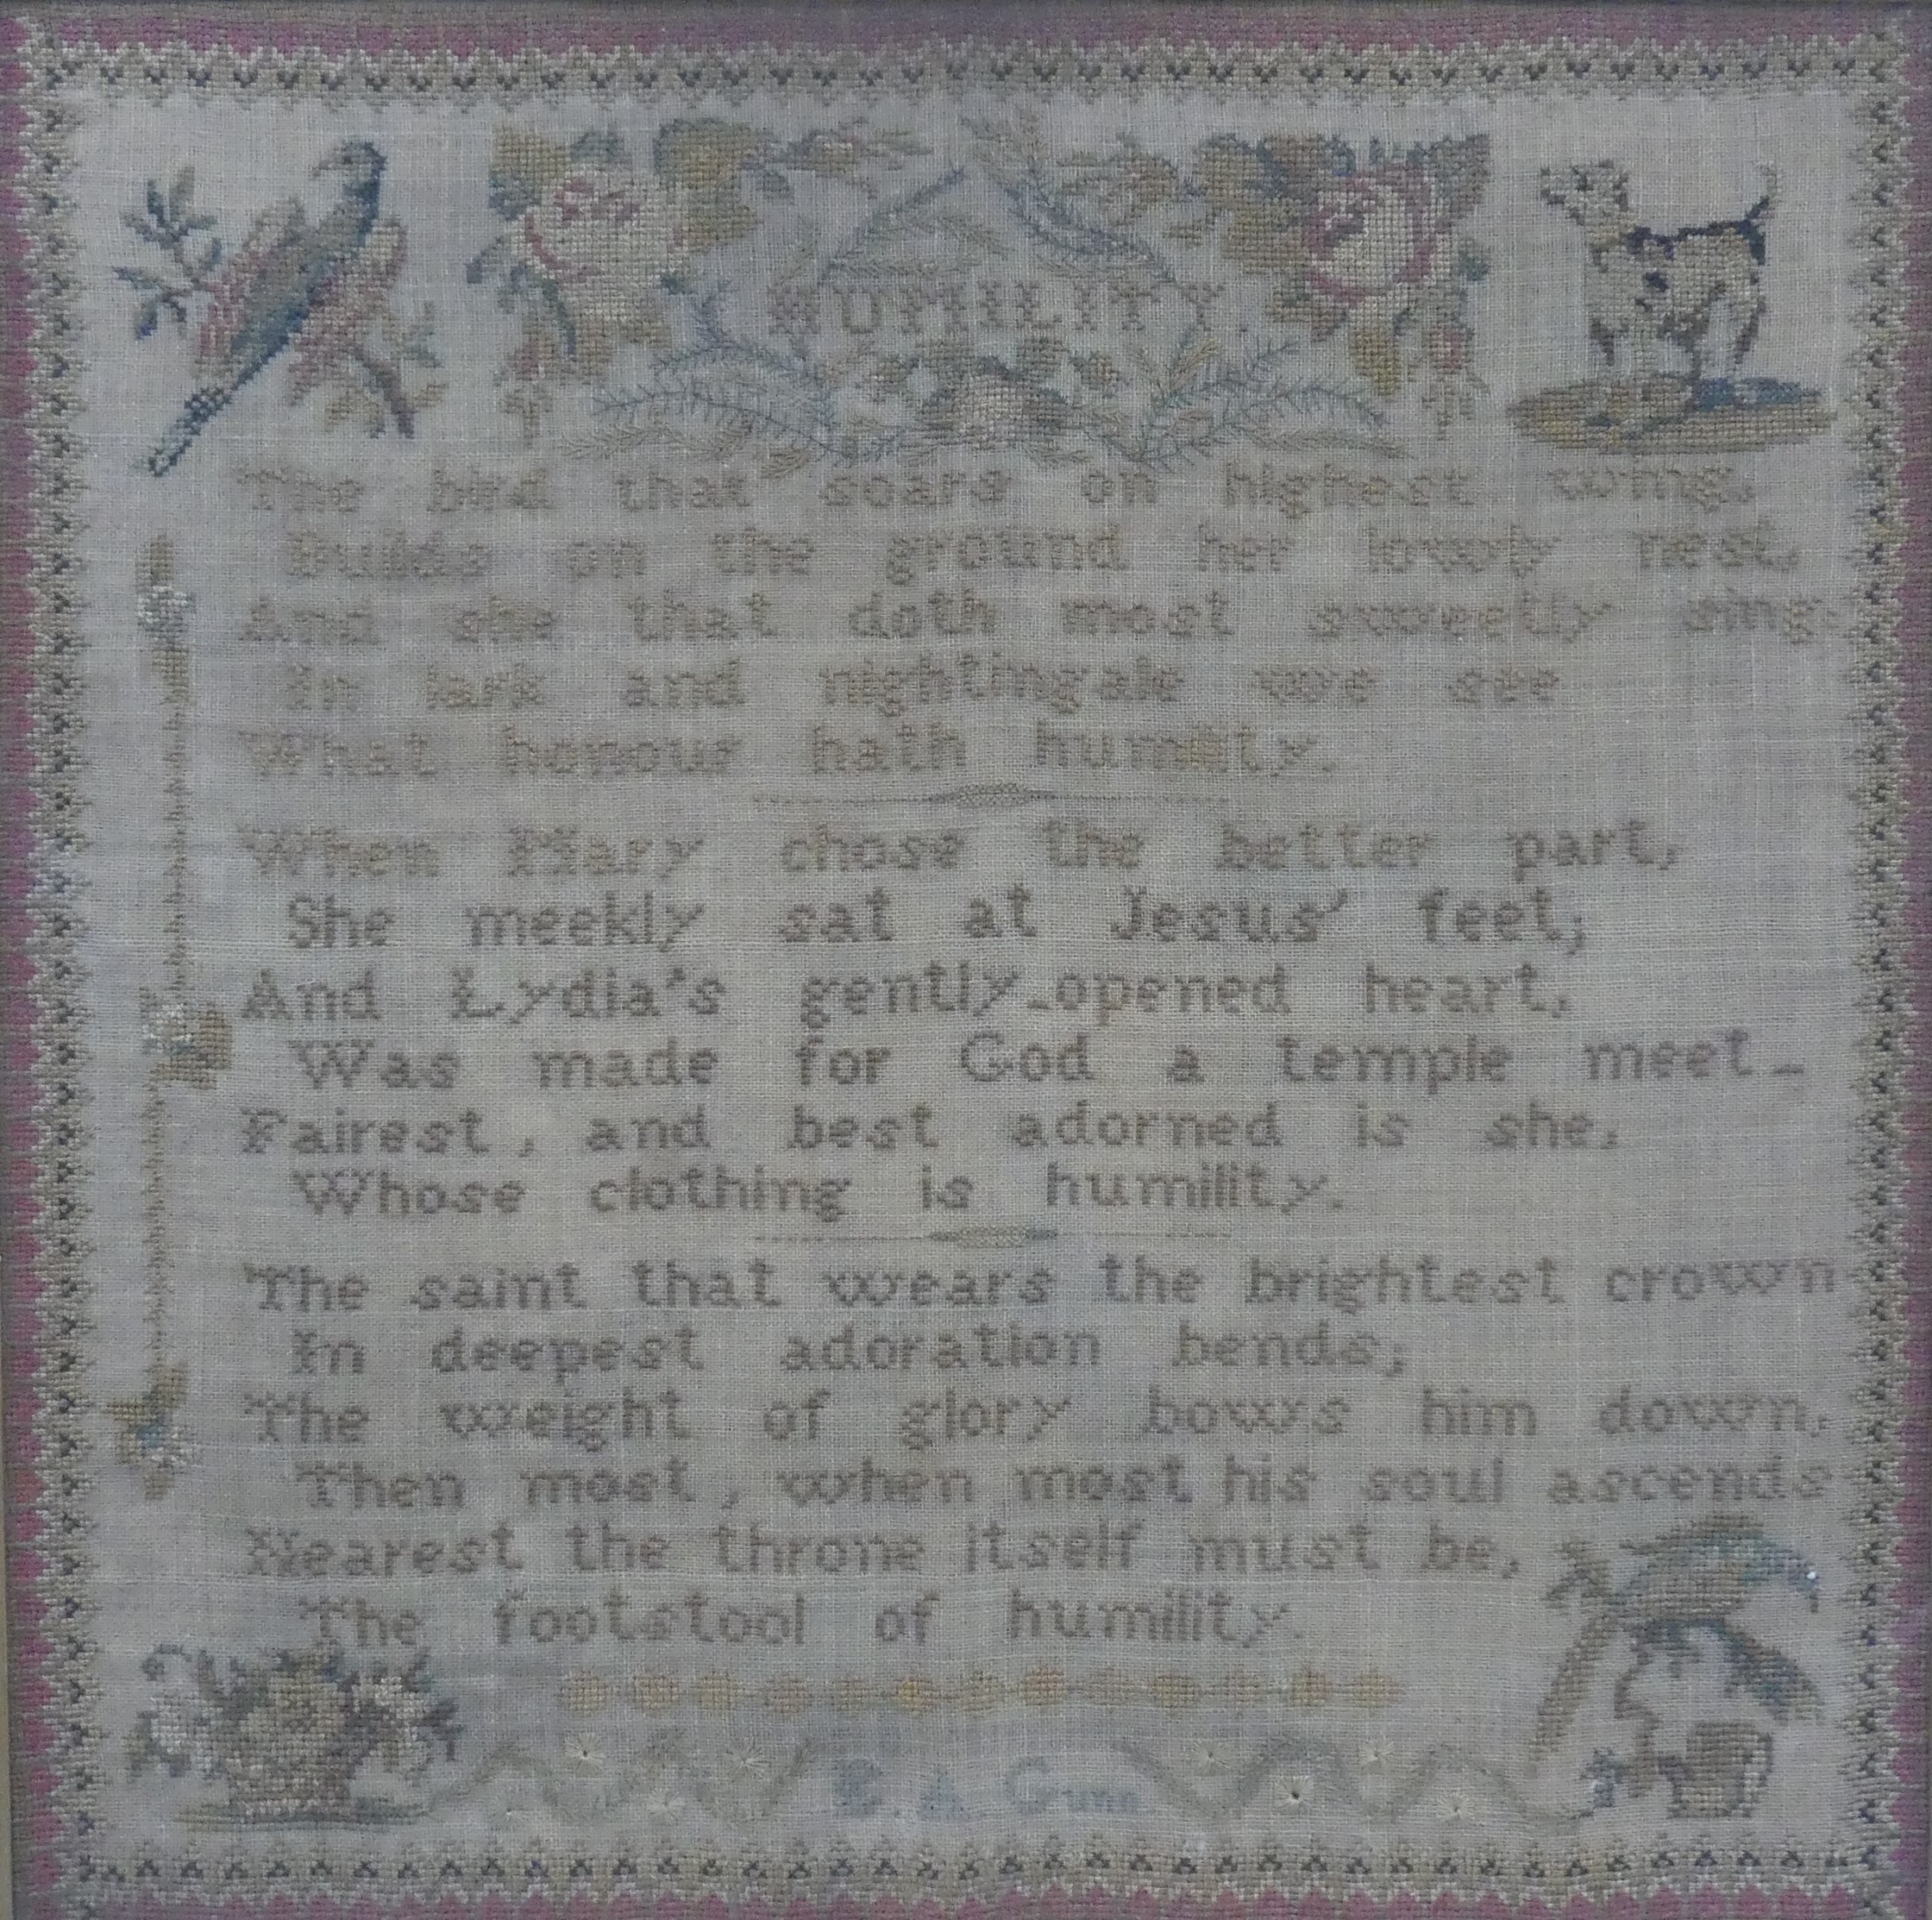 A needlework Sampler,19th century, English, worked by 'E. A. Gunn', with verses from James - Image 2 of 3